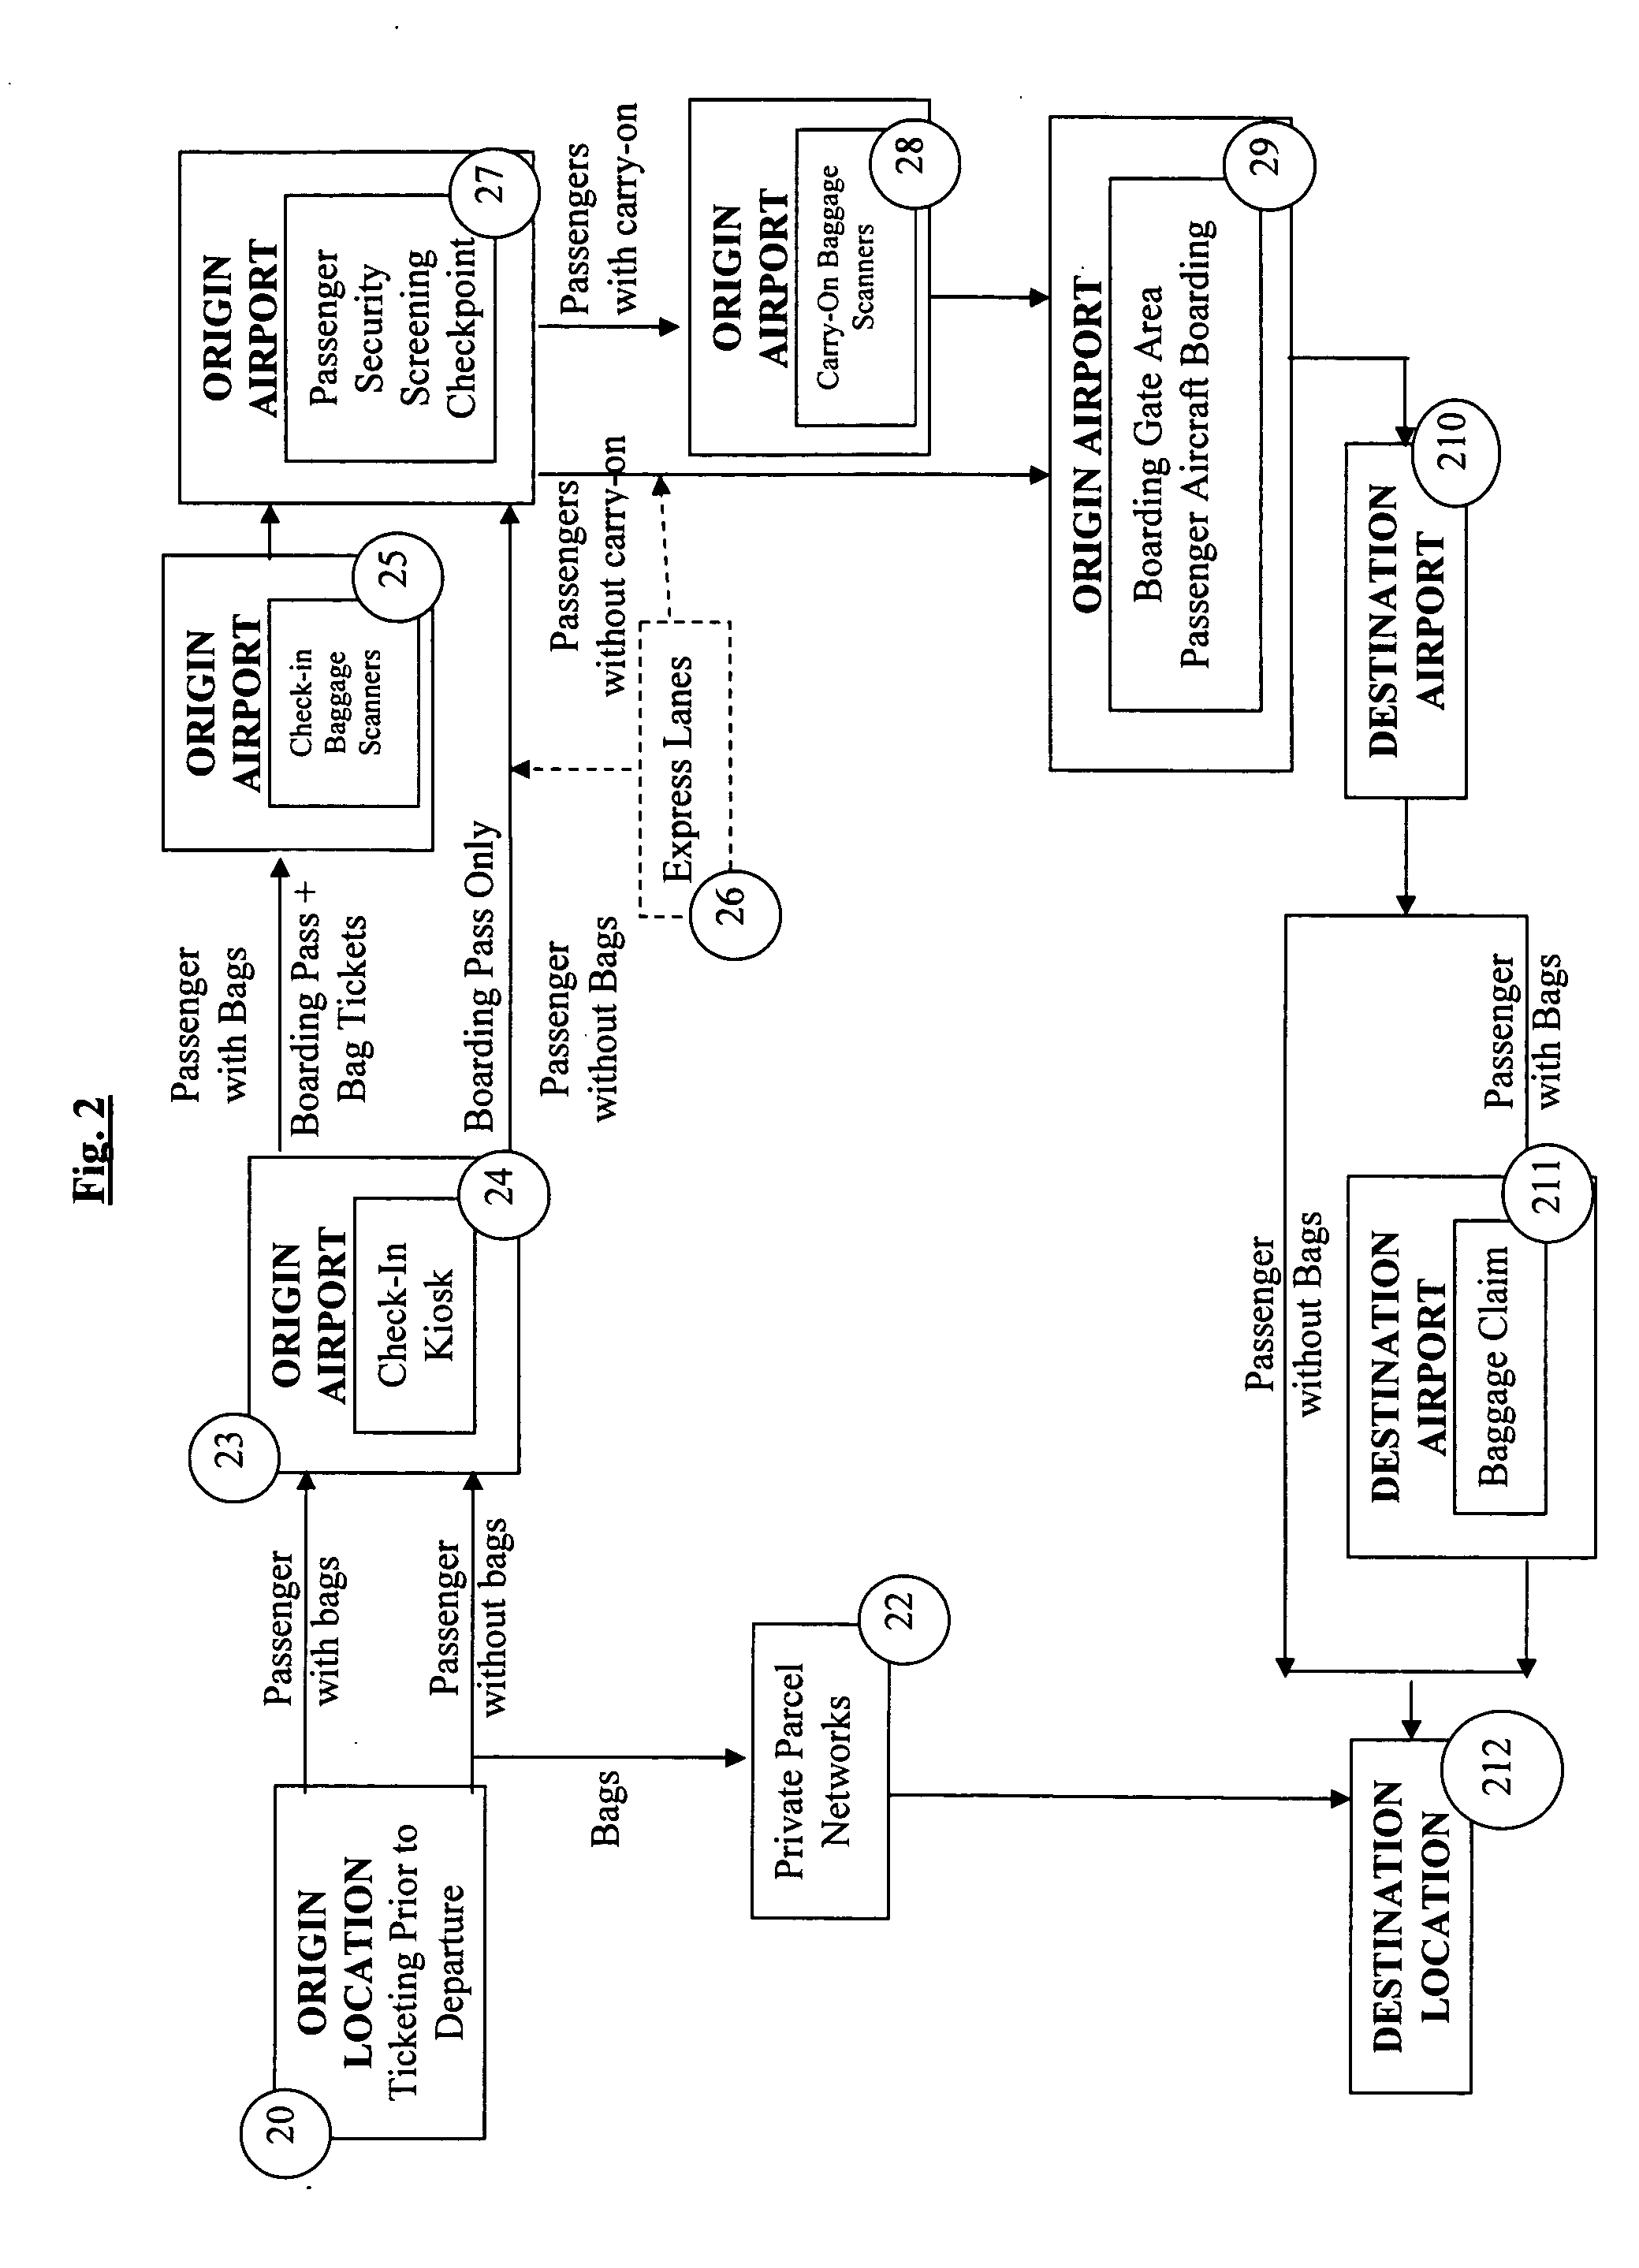 System and method for unbundling baggage costs from airfare prices